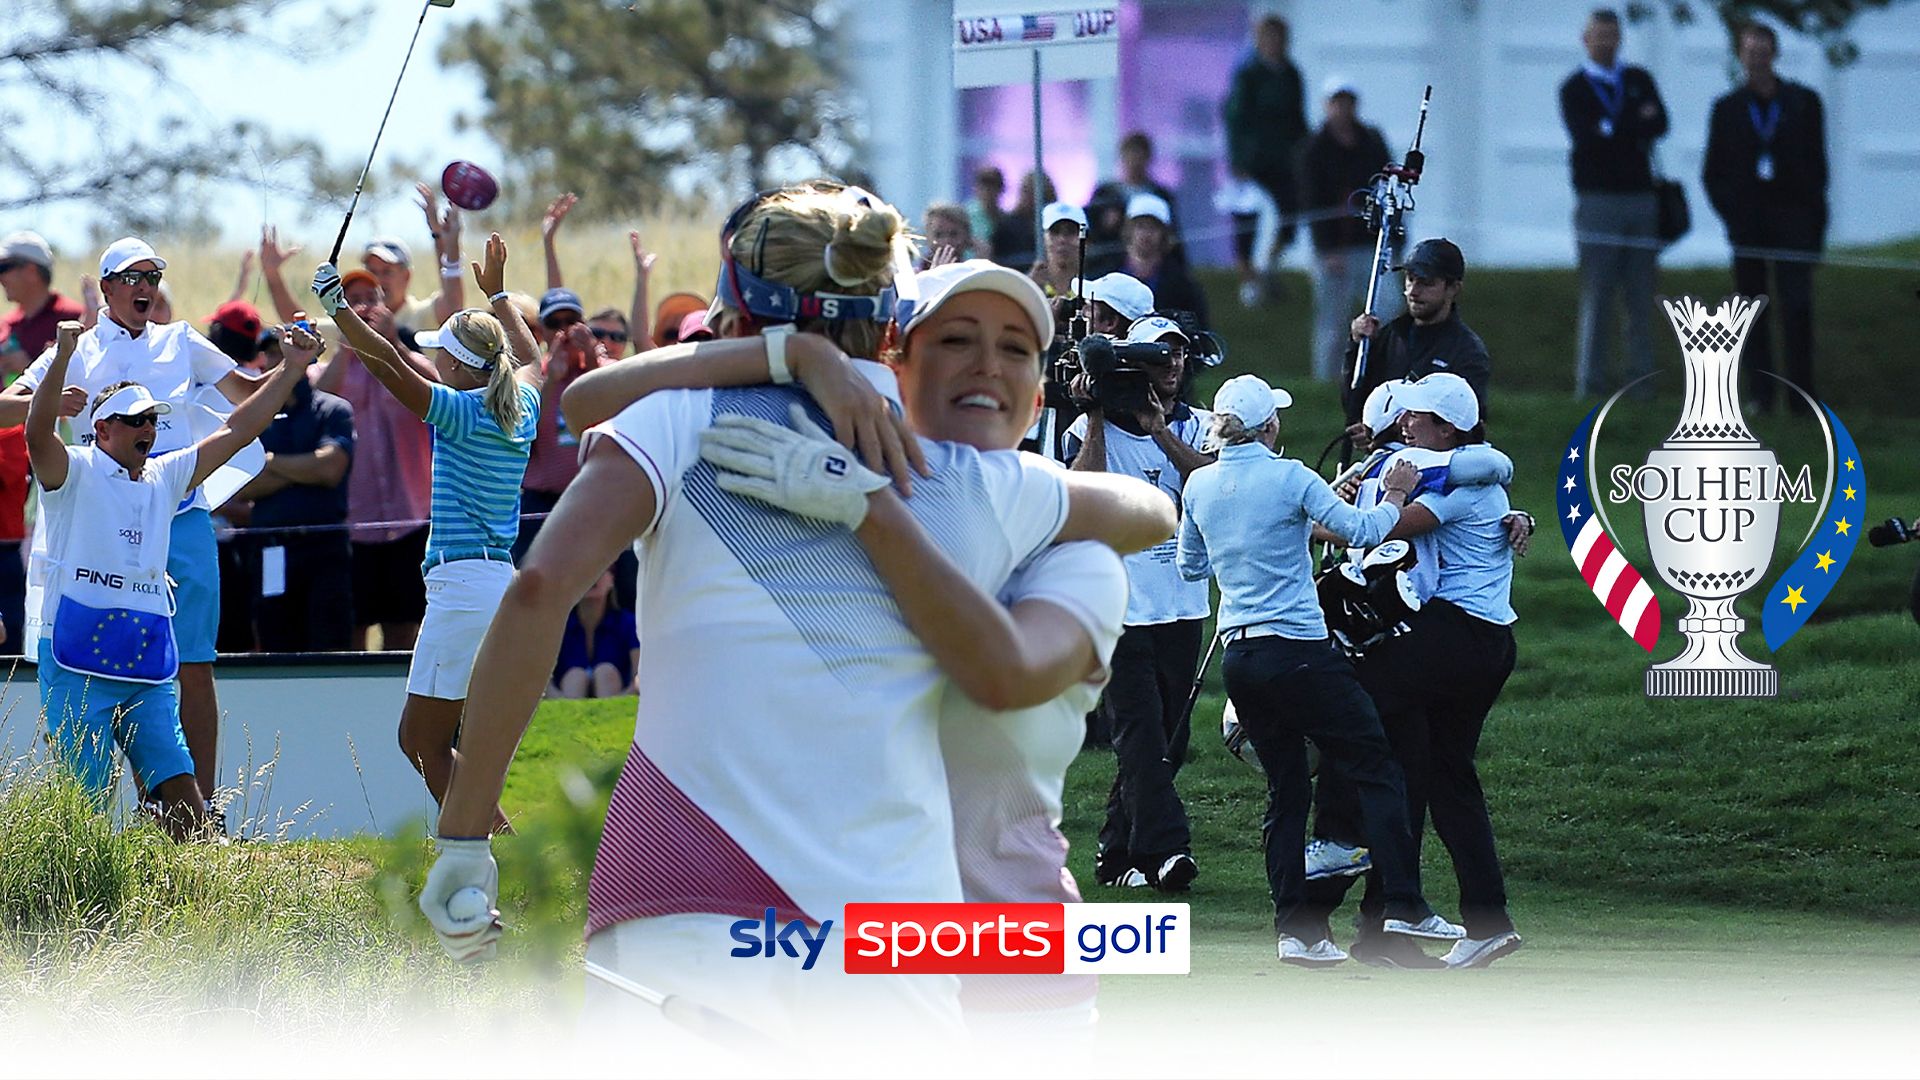 Best shots in Solheim Cup history!